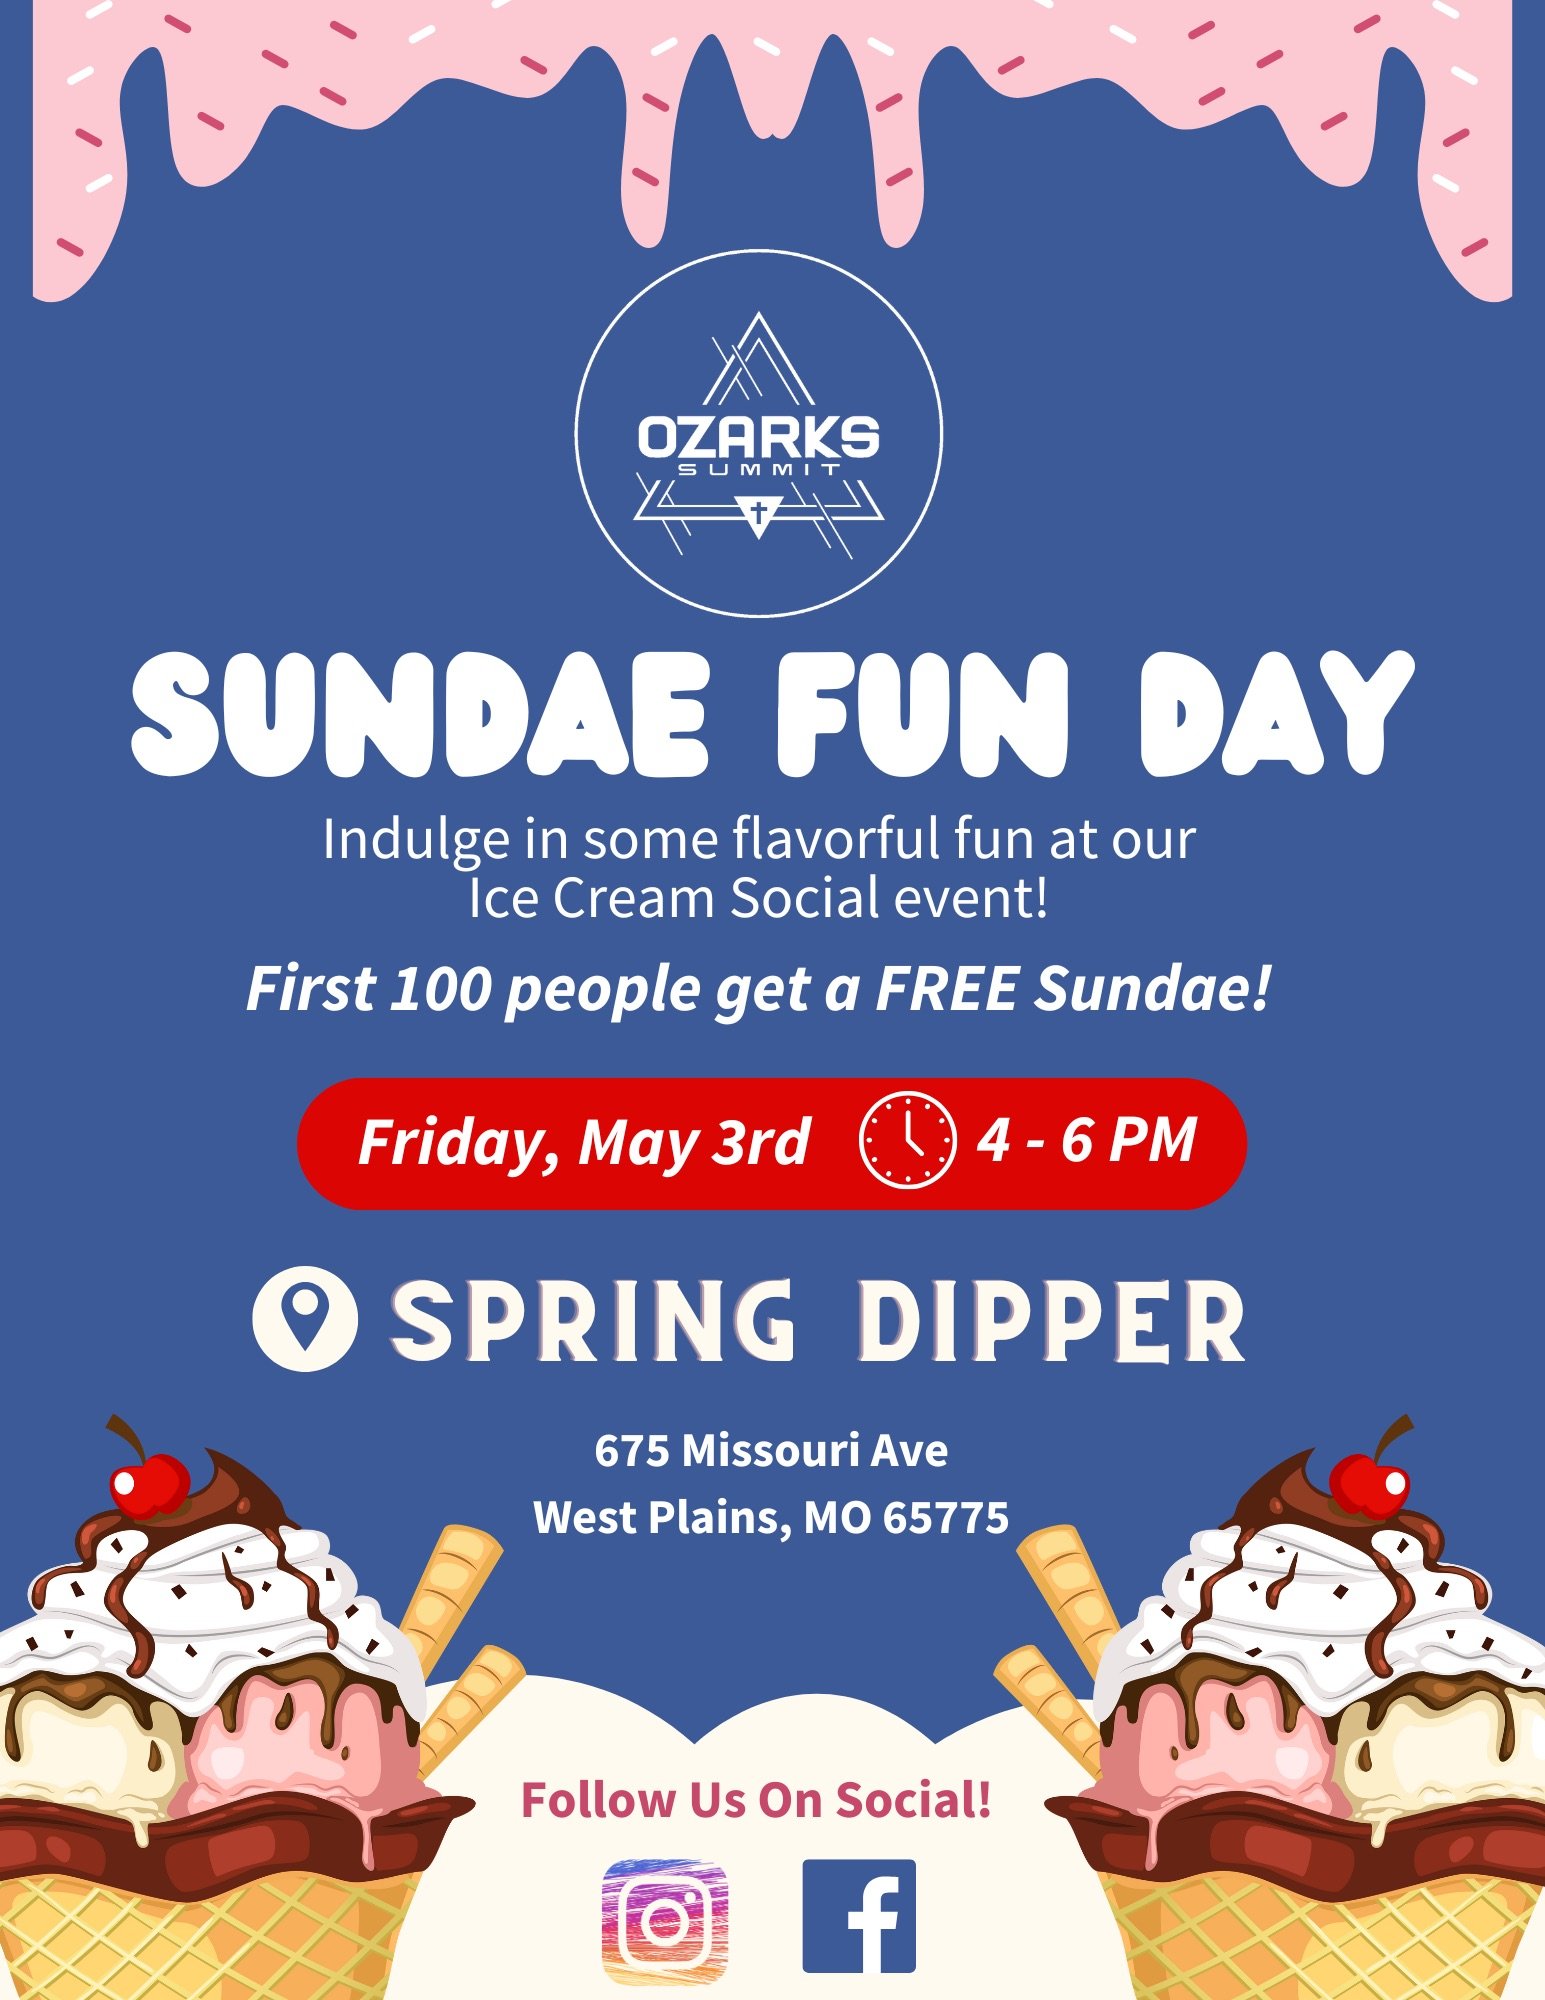 Don't forget to get your stretchy pants ready for our Sundae Fun Day at Spring Dipper! The perfect end to what is sure to be a busy week 🍨

https://fb.me/e/3AC1LYTbp